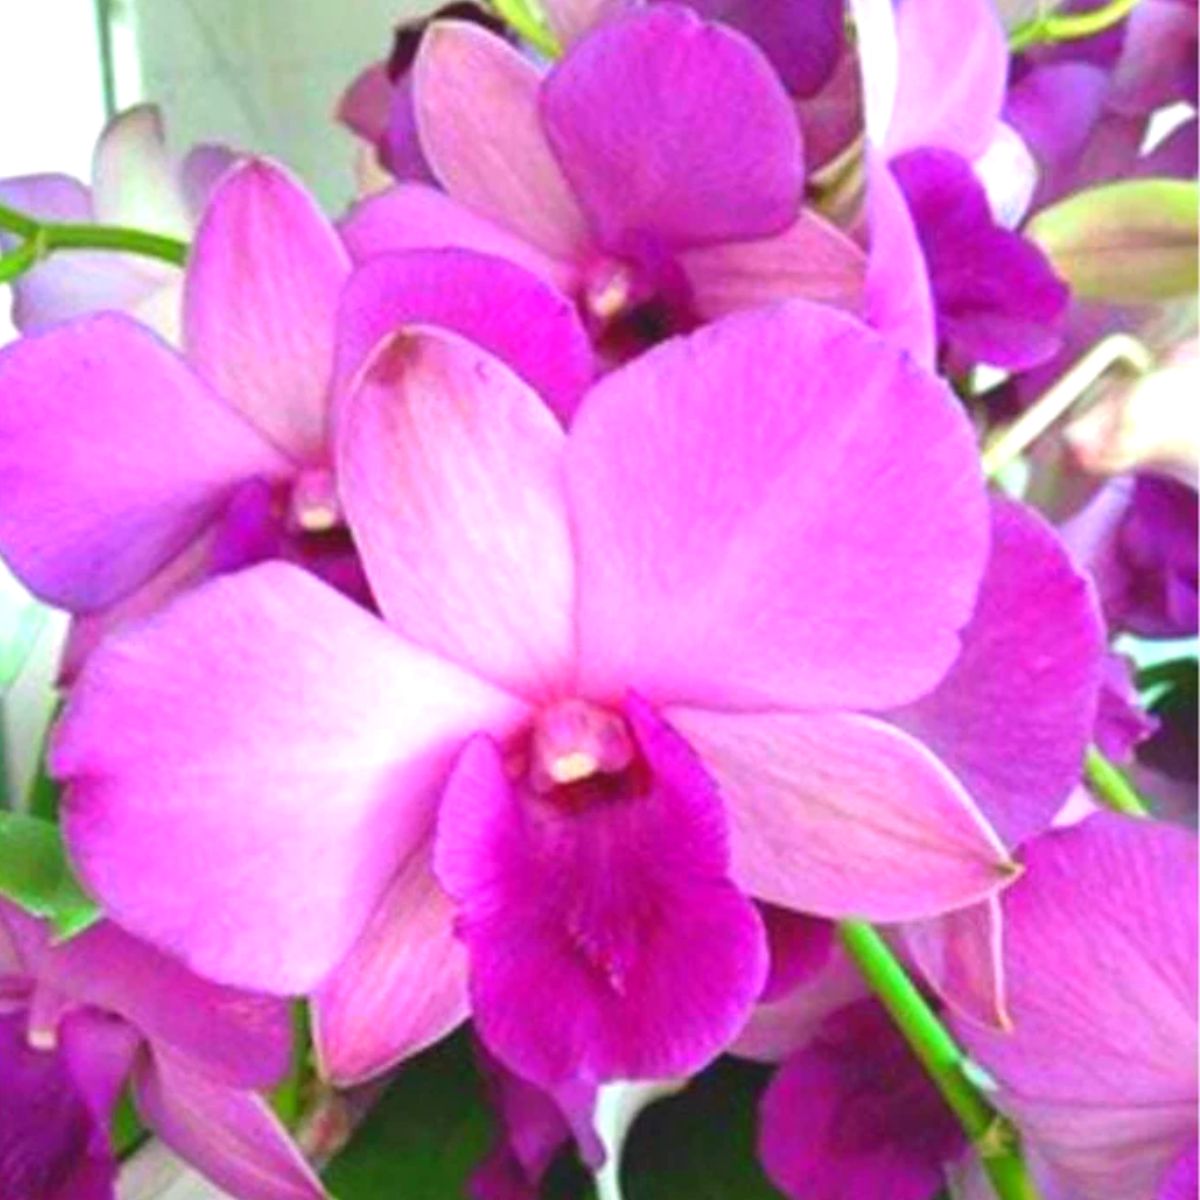 Dendrobium Pink Panda Orchid - Soft Pink Petals and Graceful Beauty